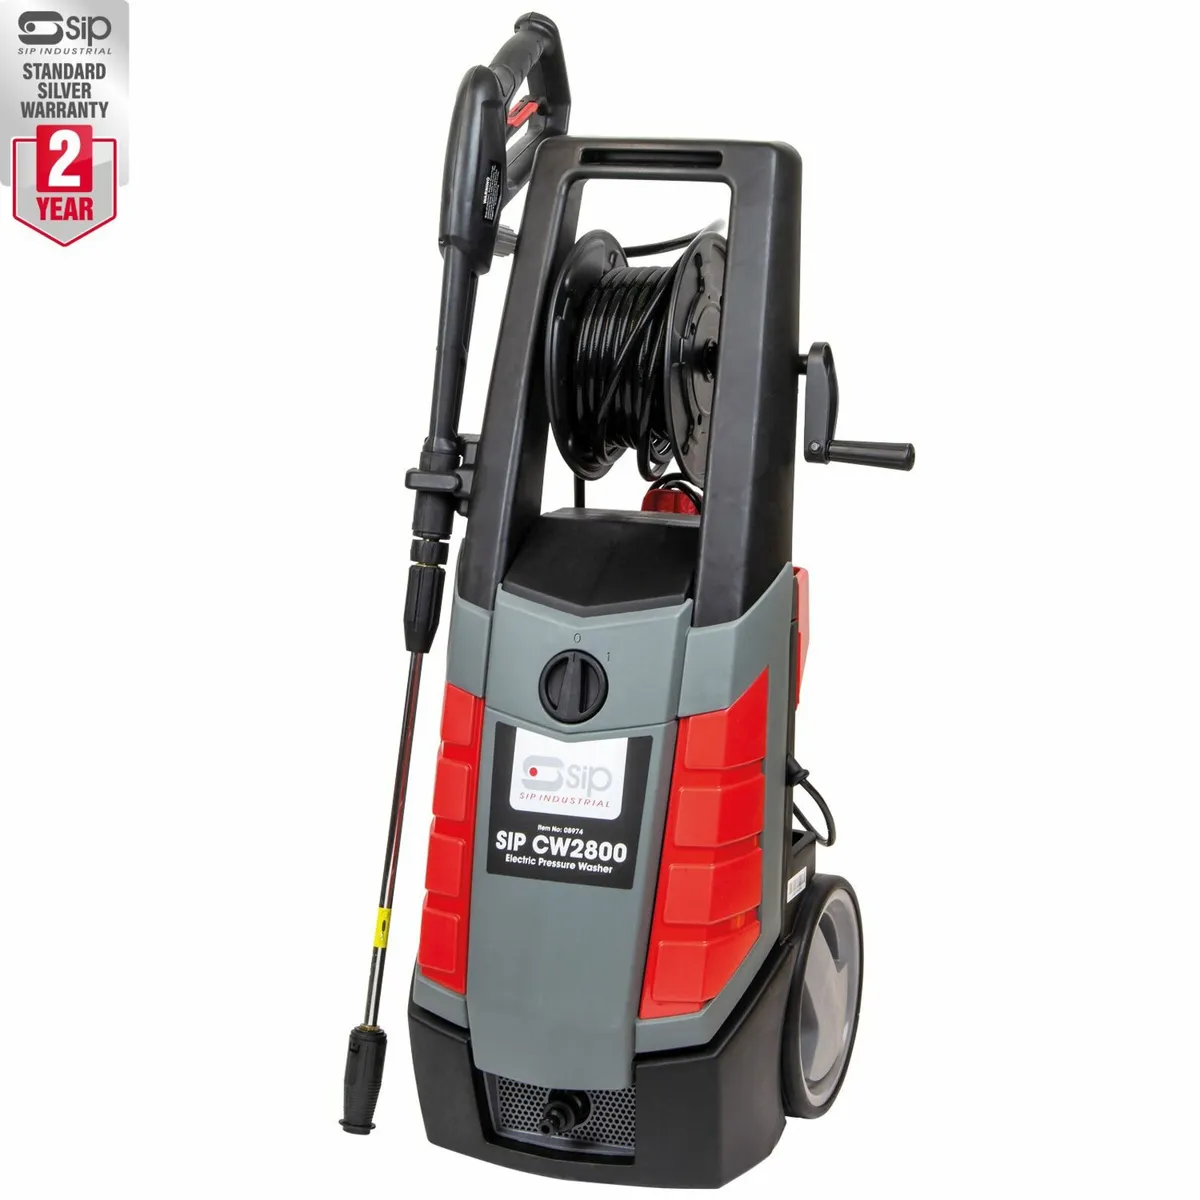 SIP CW2800 Electric Pressure Washer (2610psi) - Image 1